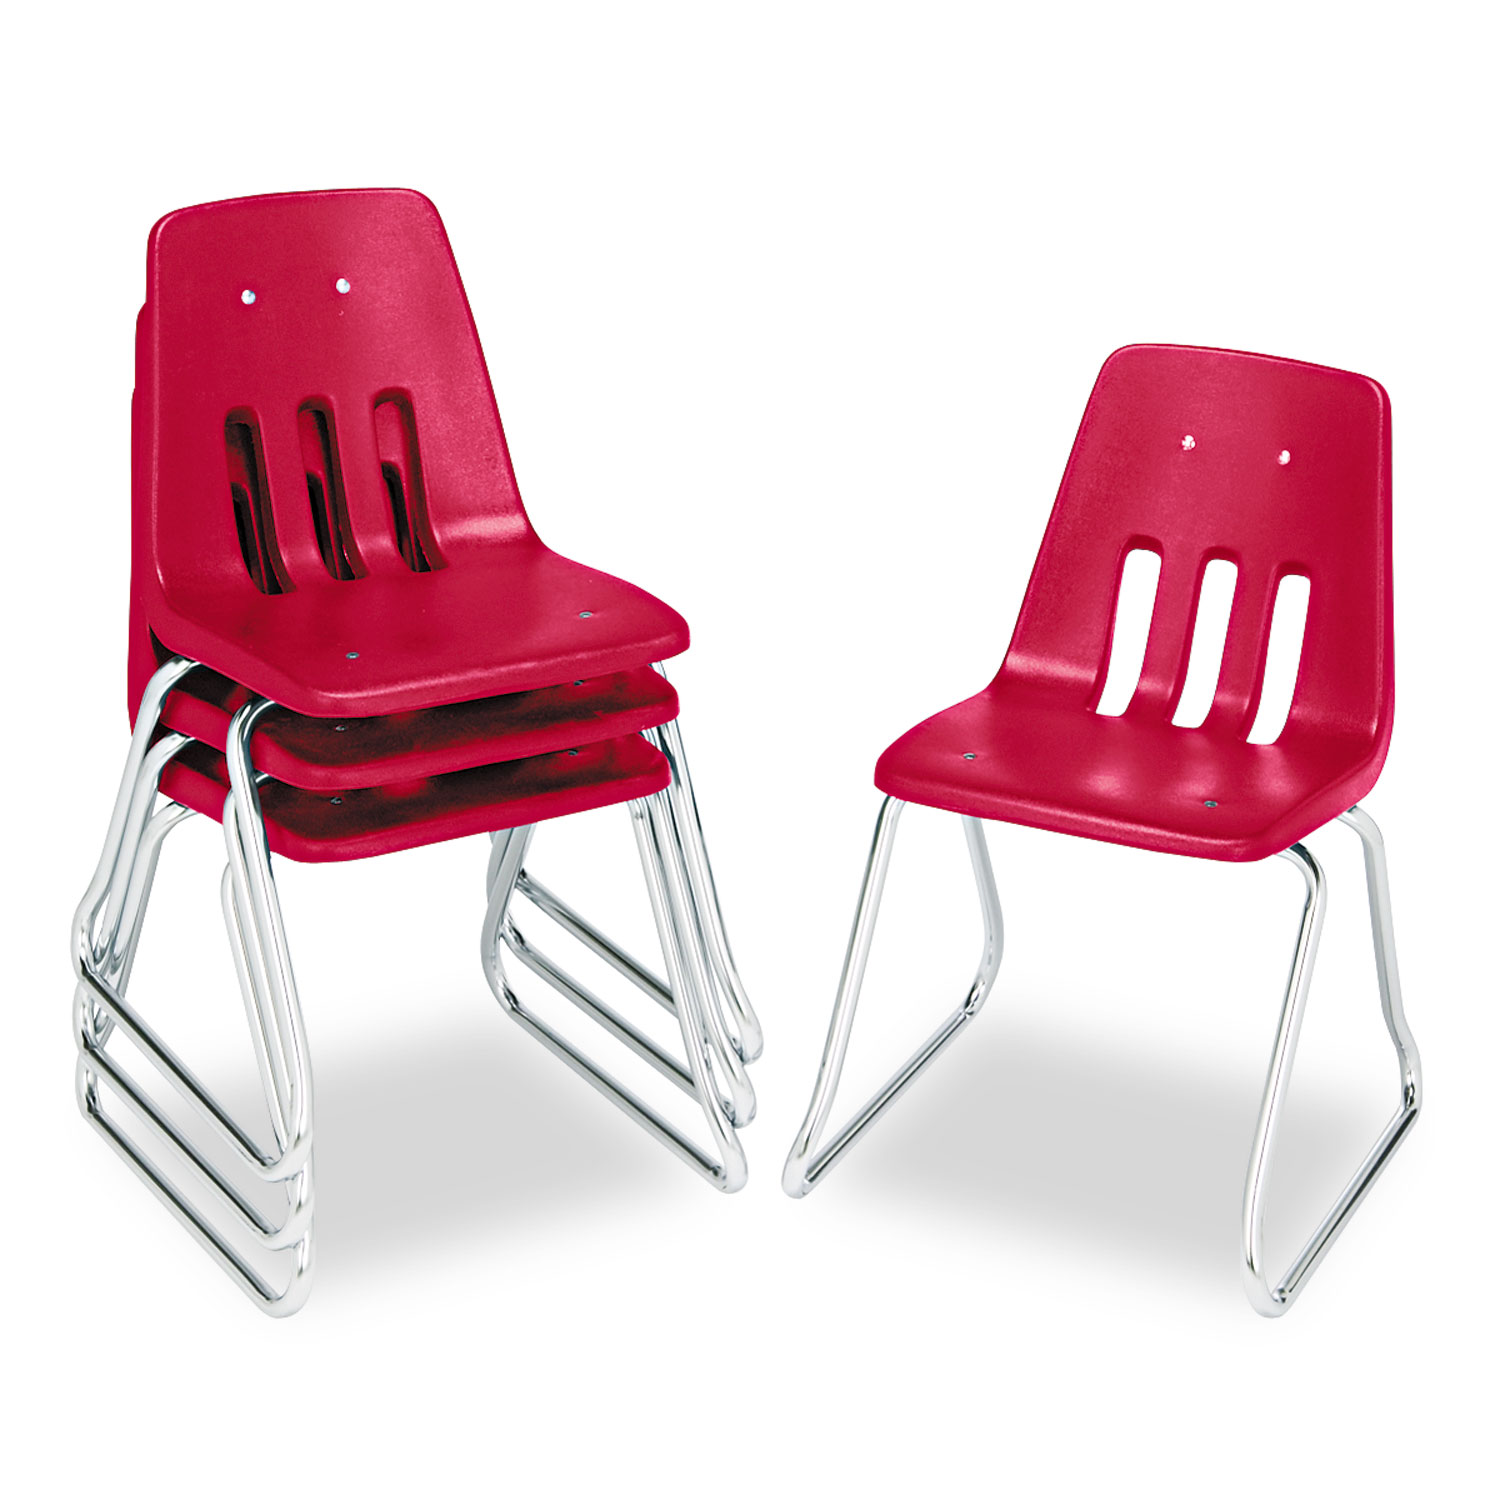 9600 Classic Series Classroom Chairs, 18 Seat Height, Red/Chrome, 4/Carton